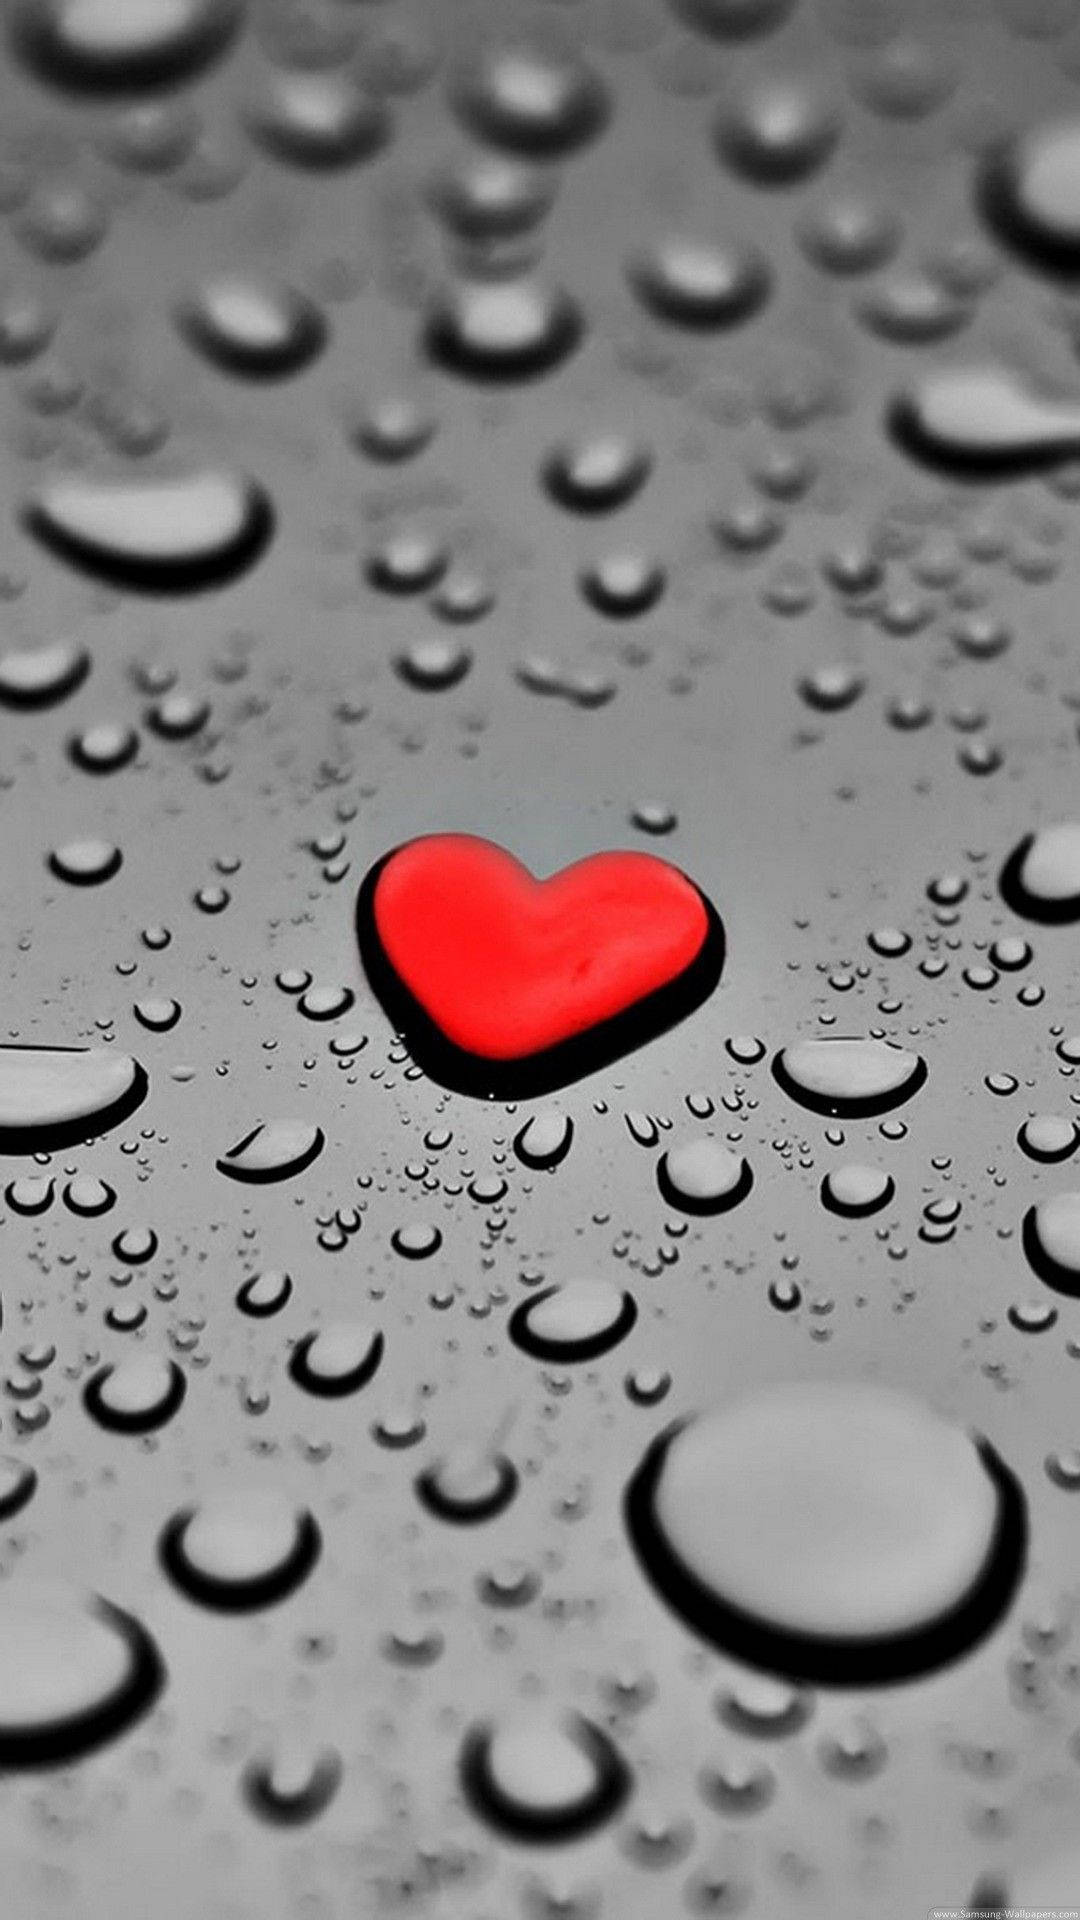 Really Cool Love Heart And Water Drops Wallpaper